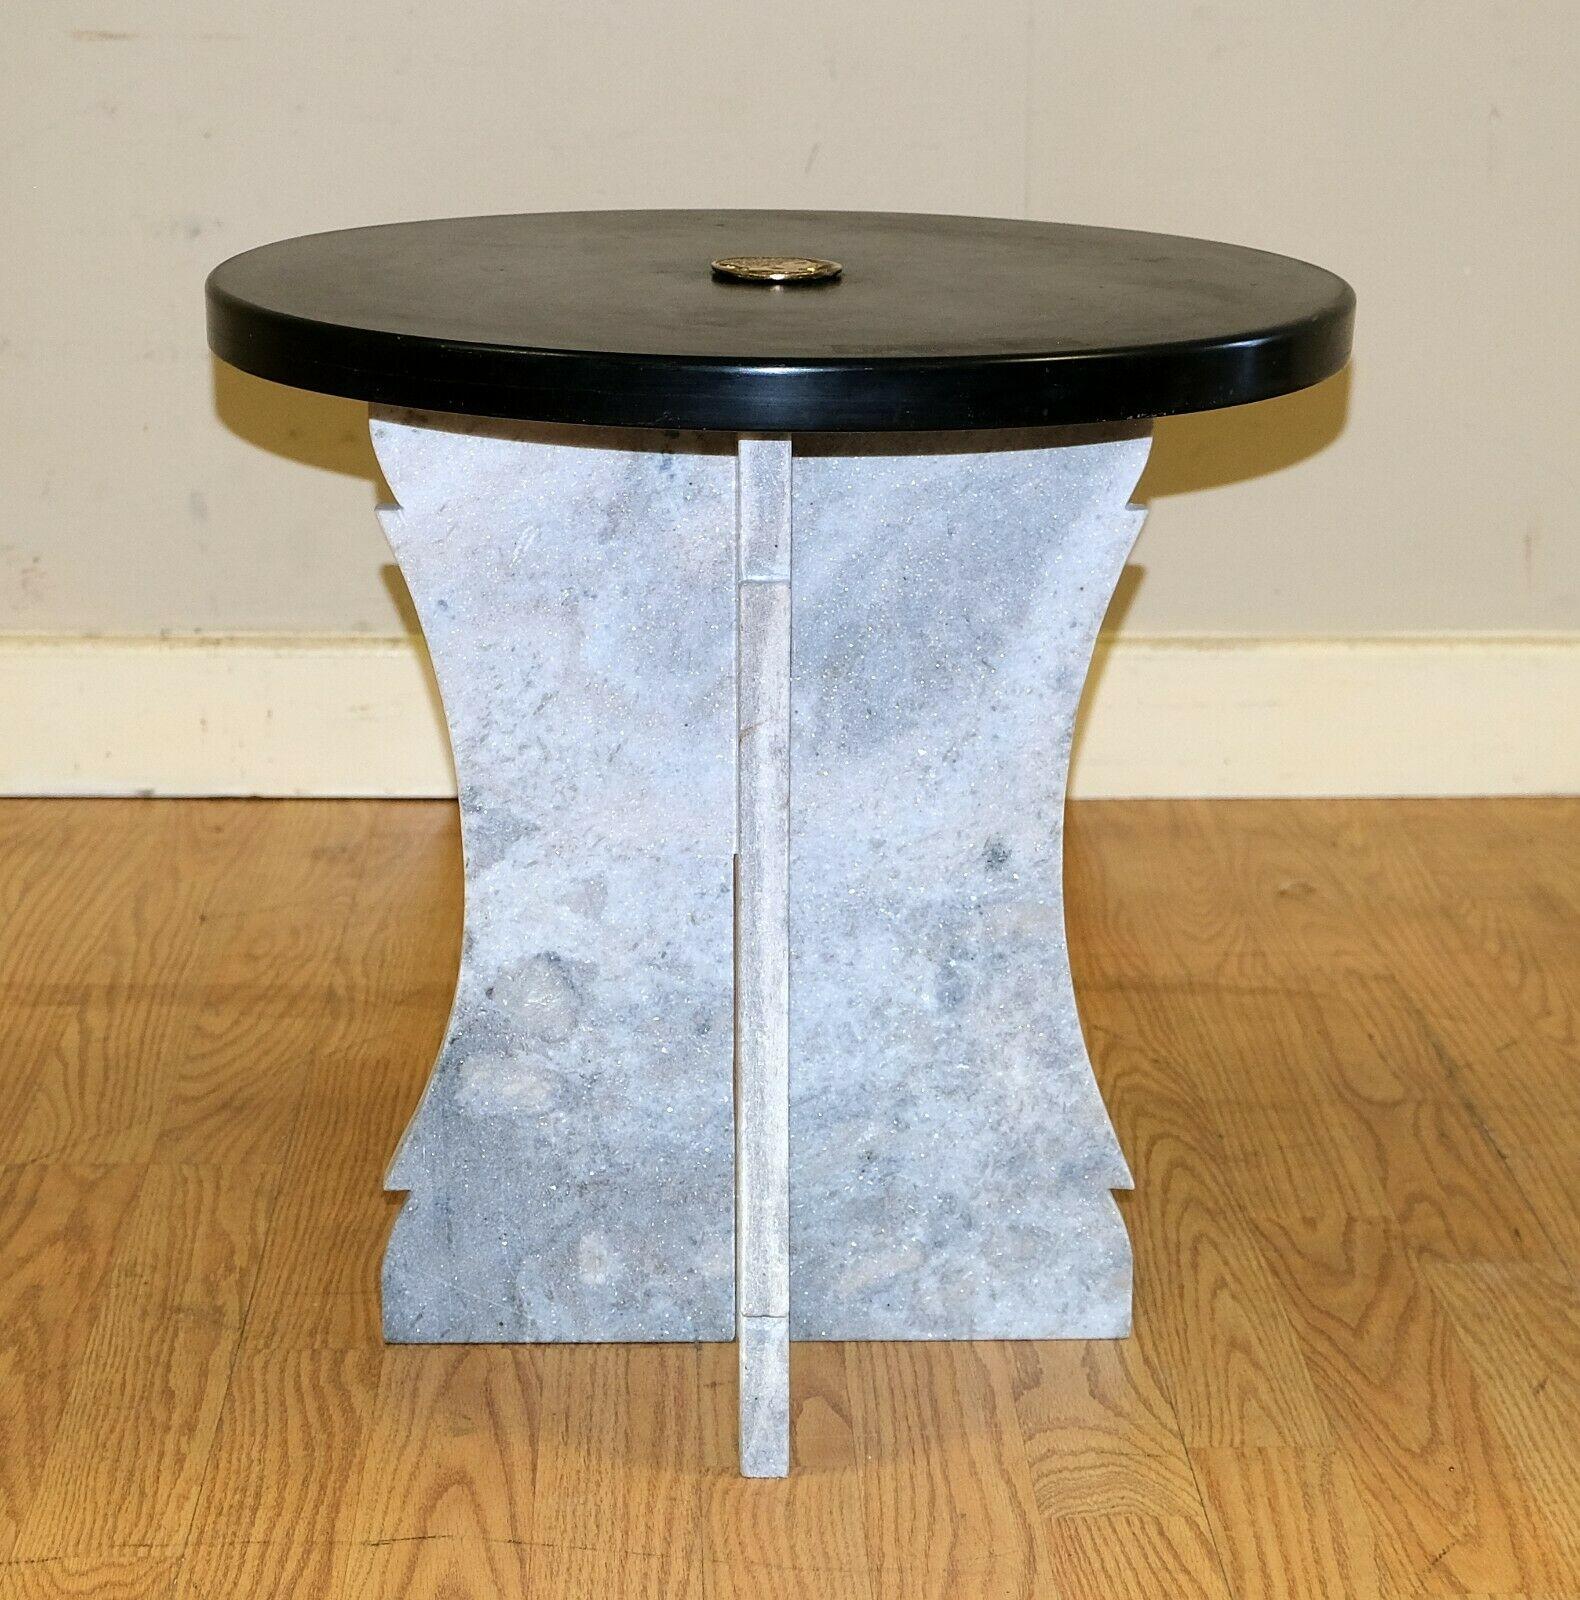 We are delighted to offer for sale this attractive low occasional circular Marble black top table.

This simple but yet good looking table is presented with X base along with a metal Roman head crest in the centre. The table doesn't use much